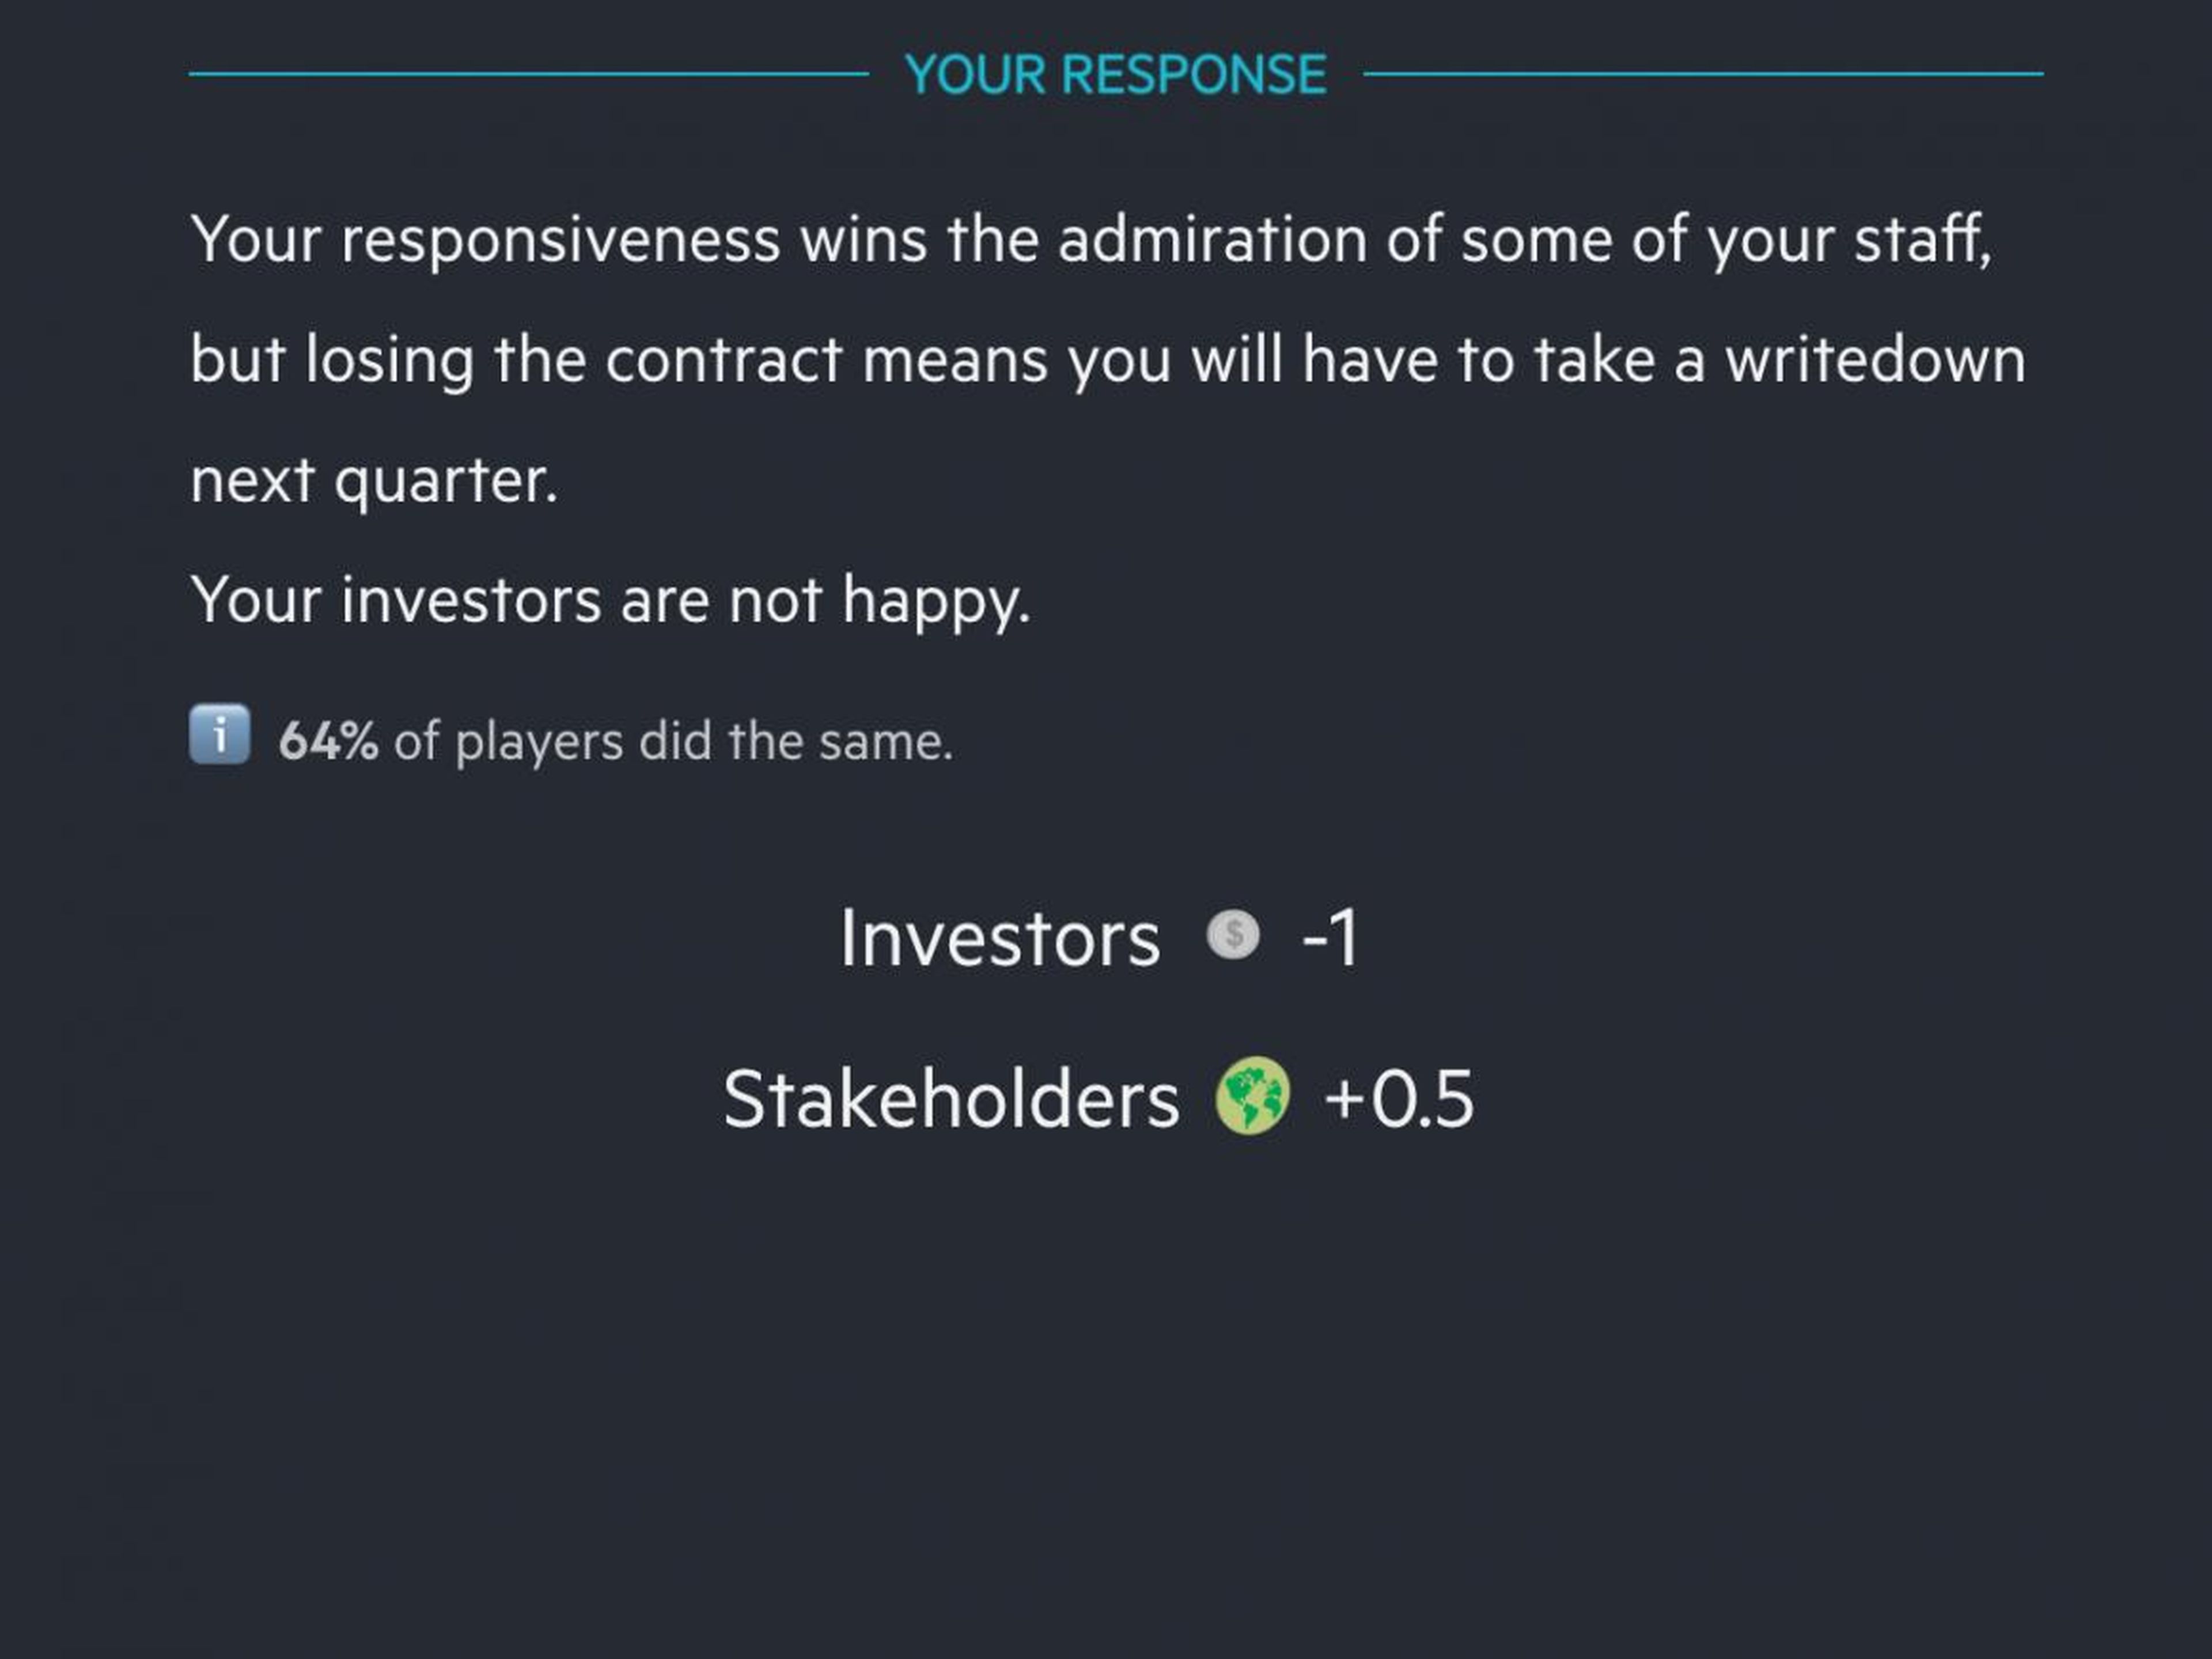 The majority of players made the same choice as me and dropped the contract.